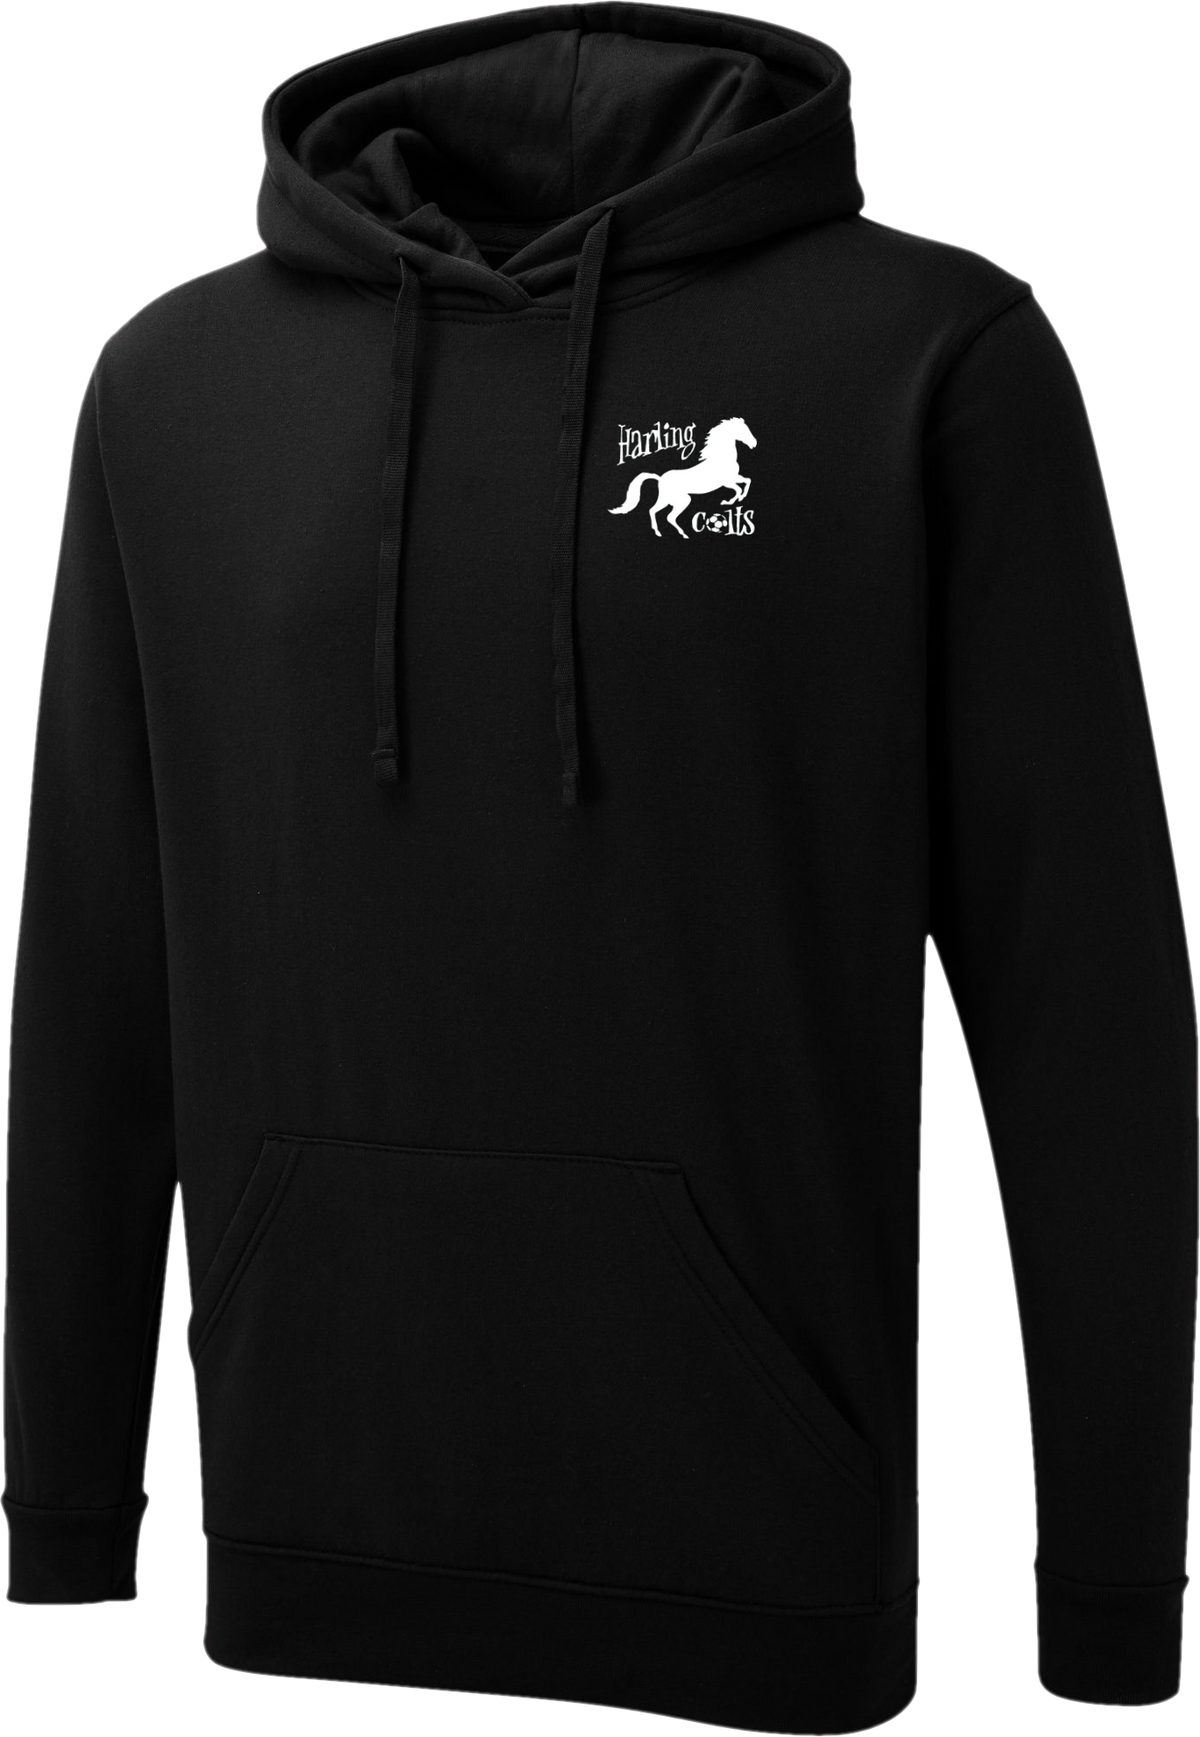 Harling Colts FC Club Hoody in Adult